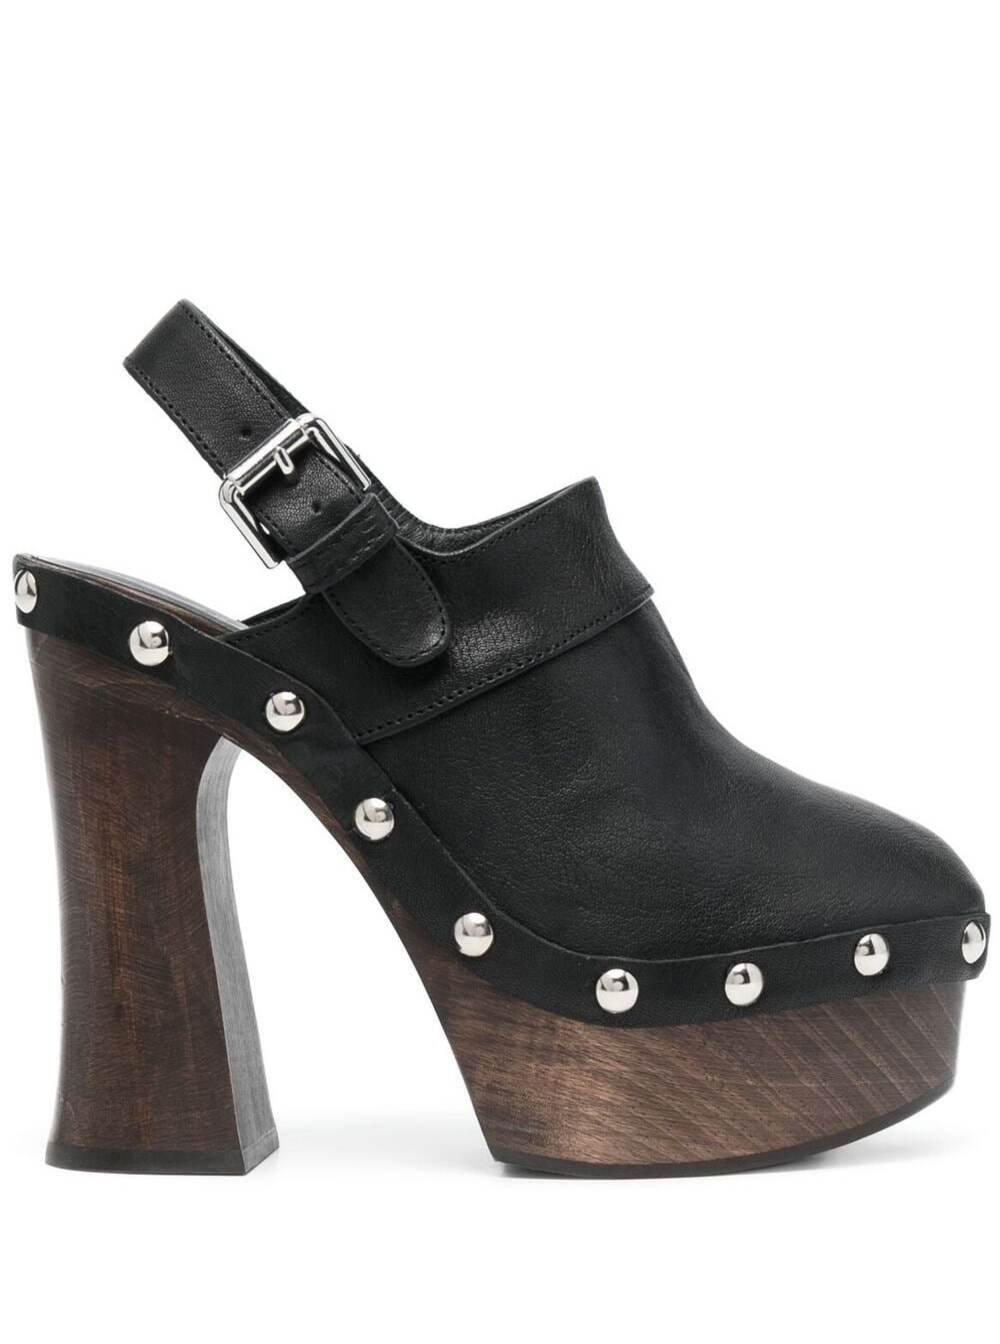 PHILOSOPHY DI LORENZO SERAFINI BLACK MAZI-CLOG WITH METAL STUDS AND WOODEN-EFFECT PLATFORM IN SMOOTH LEATHER WOMAN